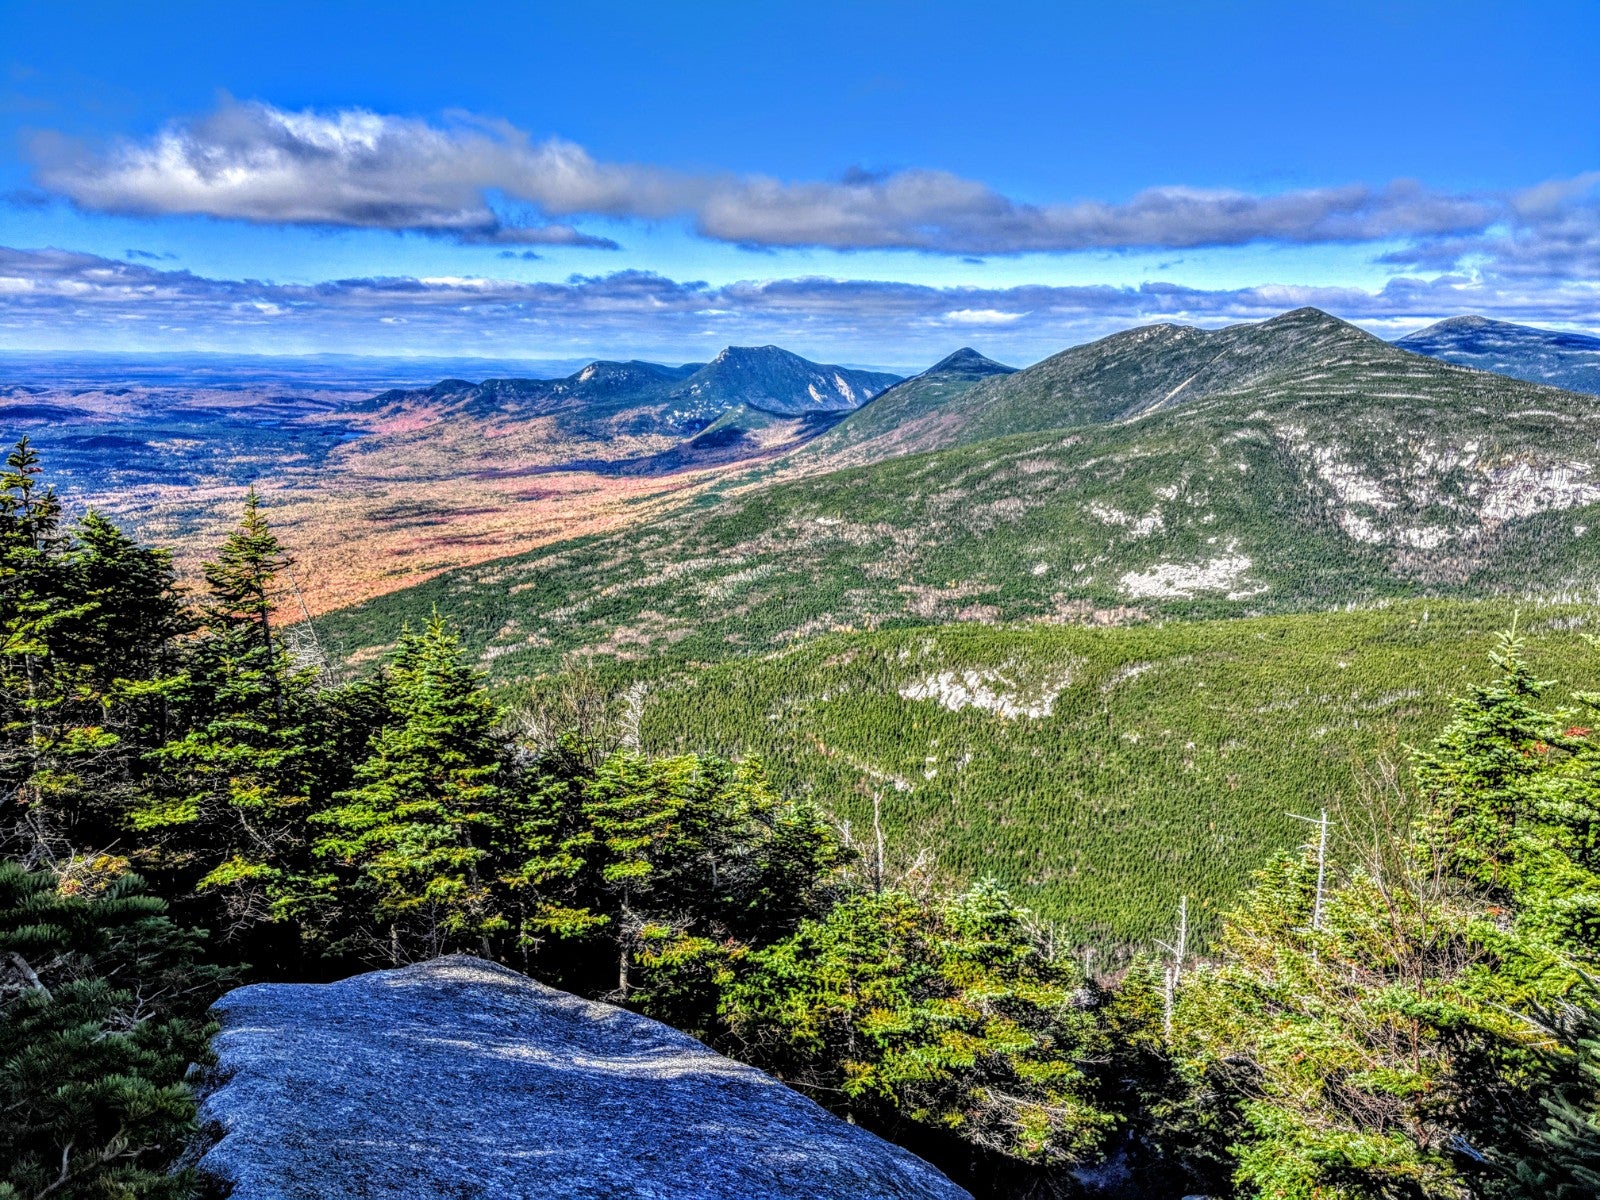 Views from Katahdin, just above tree line.